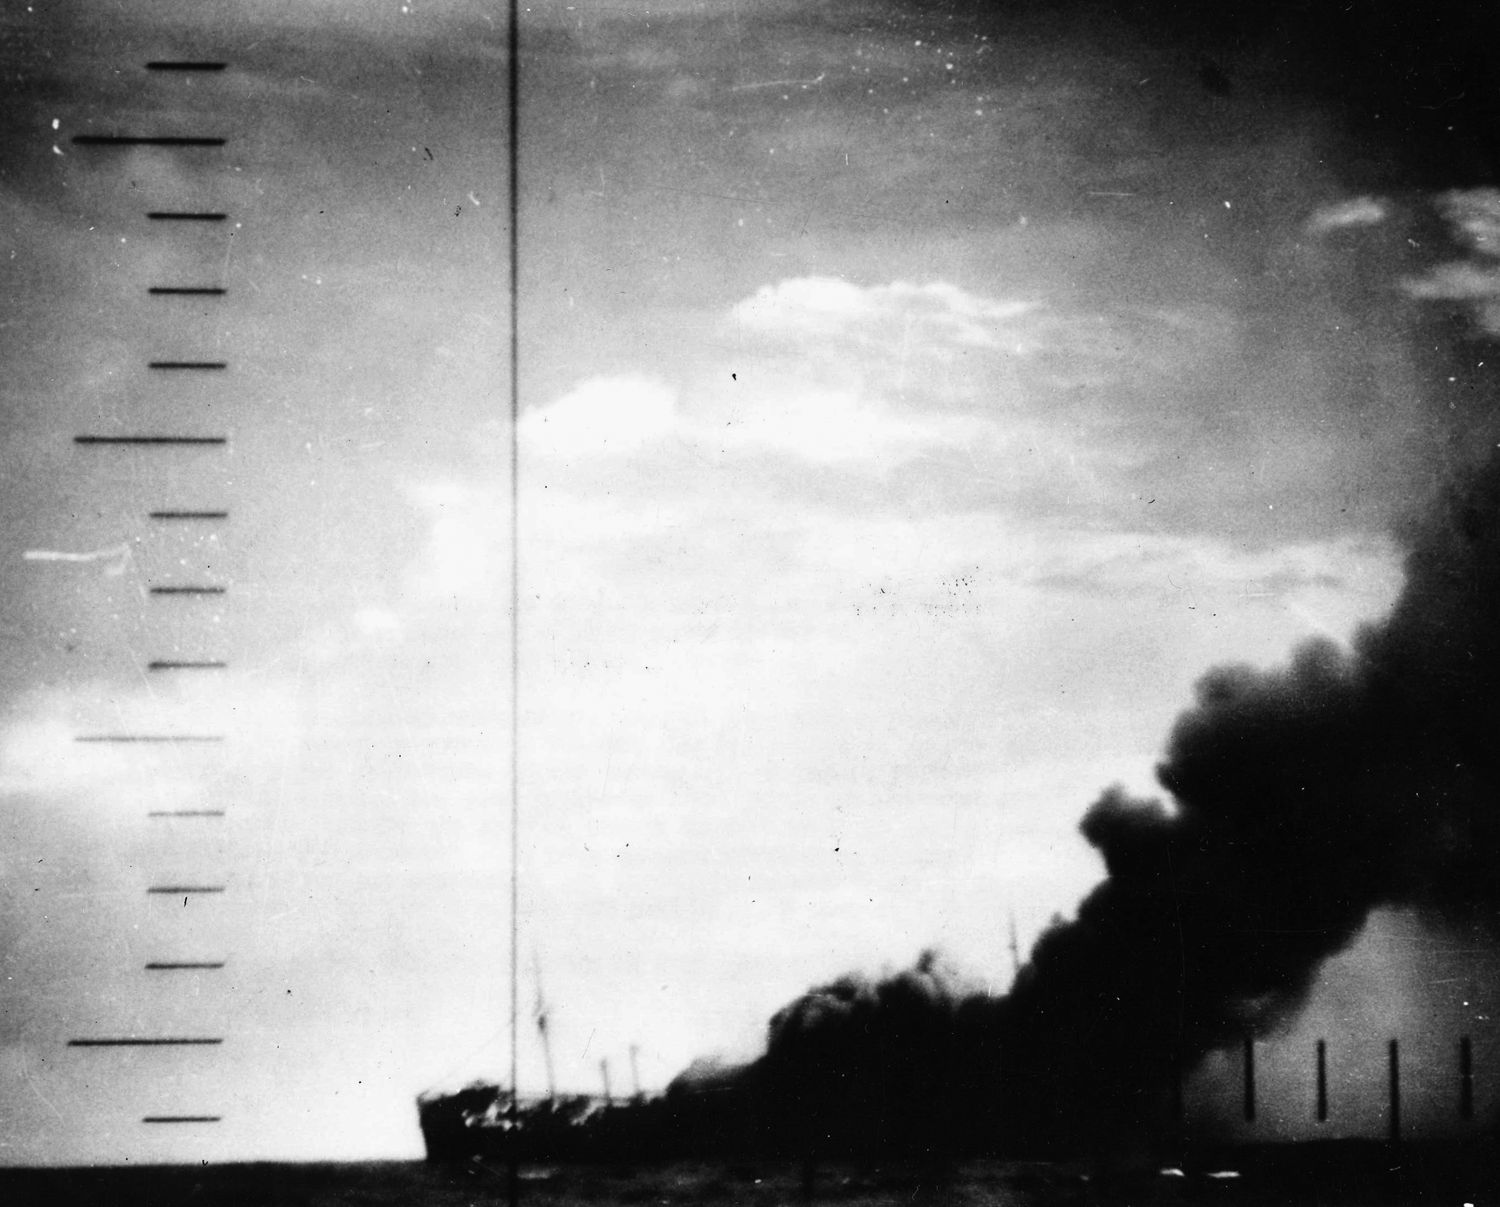 Seen through the periscope of the U.S. Navy submarine that has just successfully attacked it, a stricken Japanese warship lists to port and belches a heavy cloud of black smoke before plunging to the bottom of the Pacific Ocean.